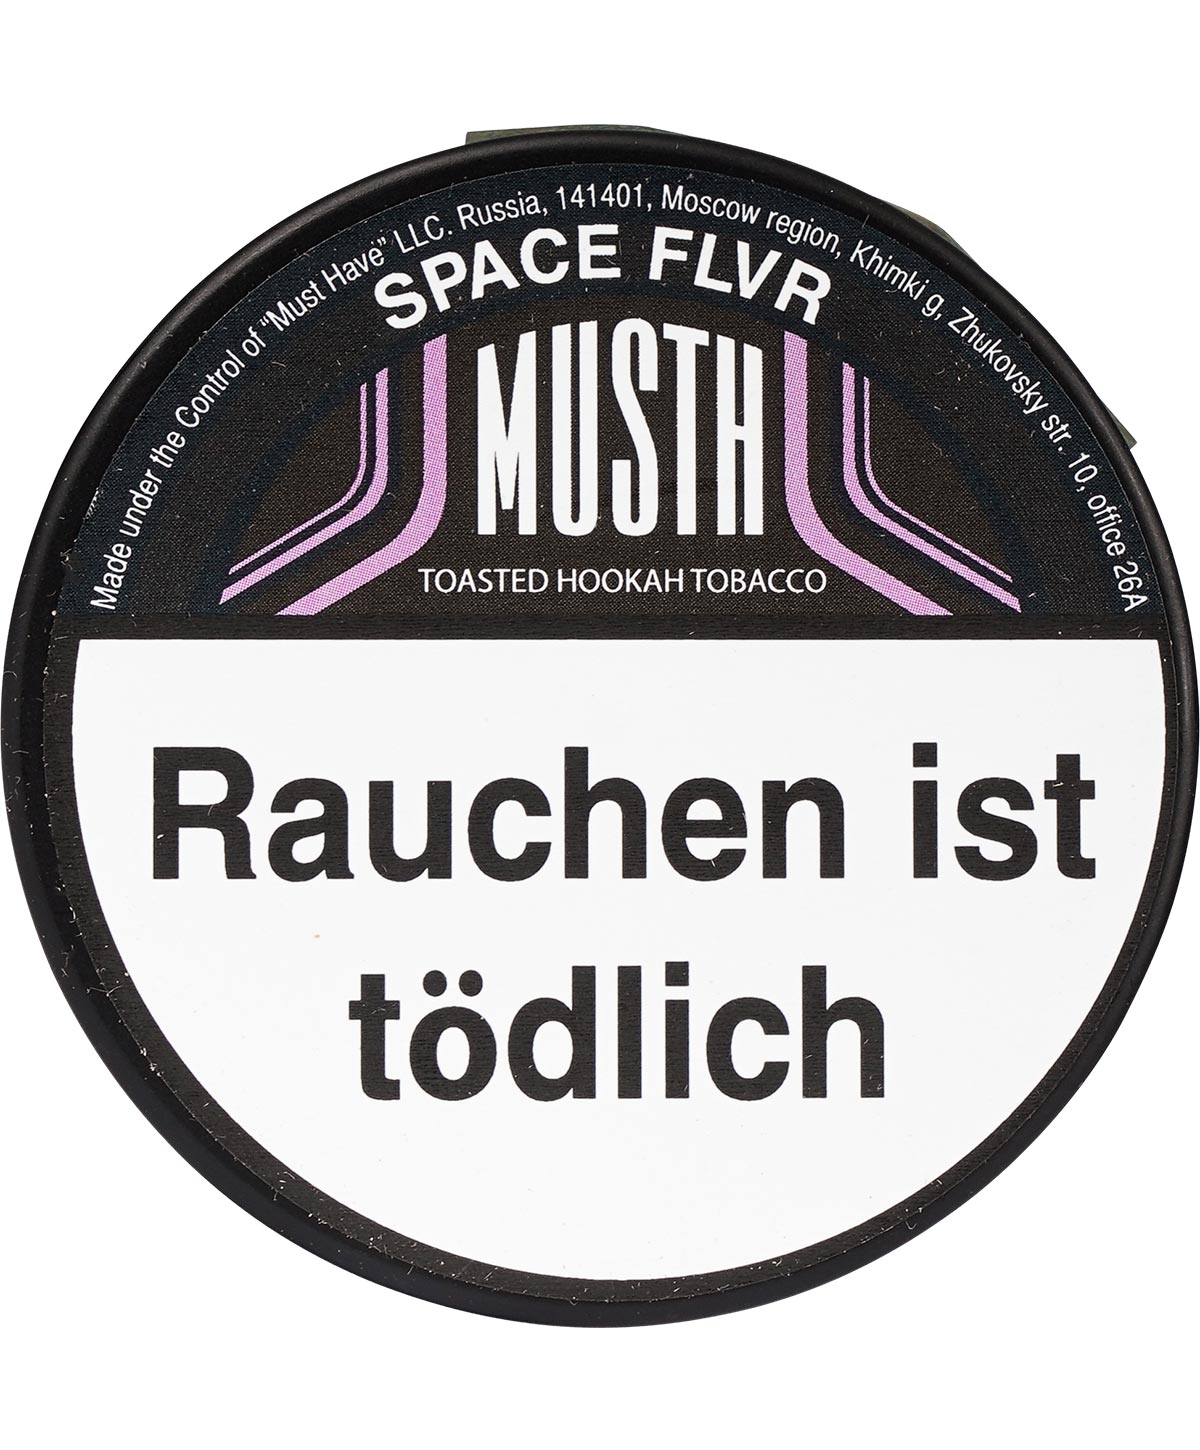 Must H Space Flvr 25g